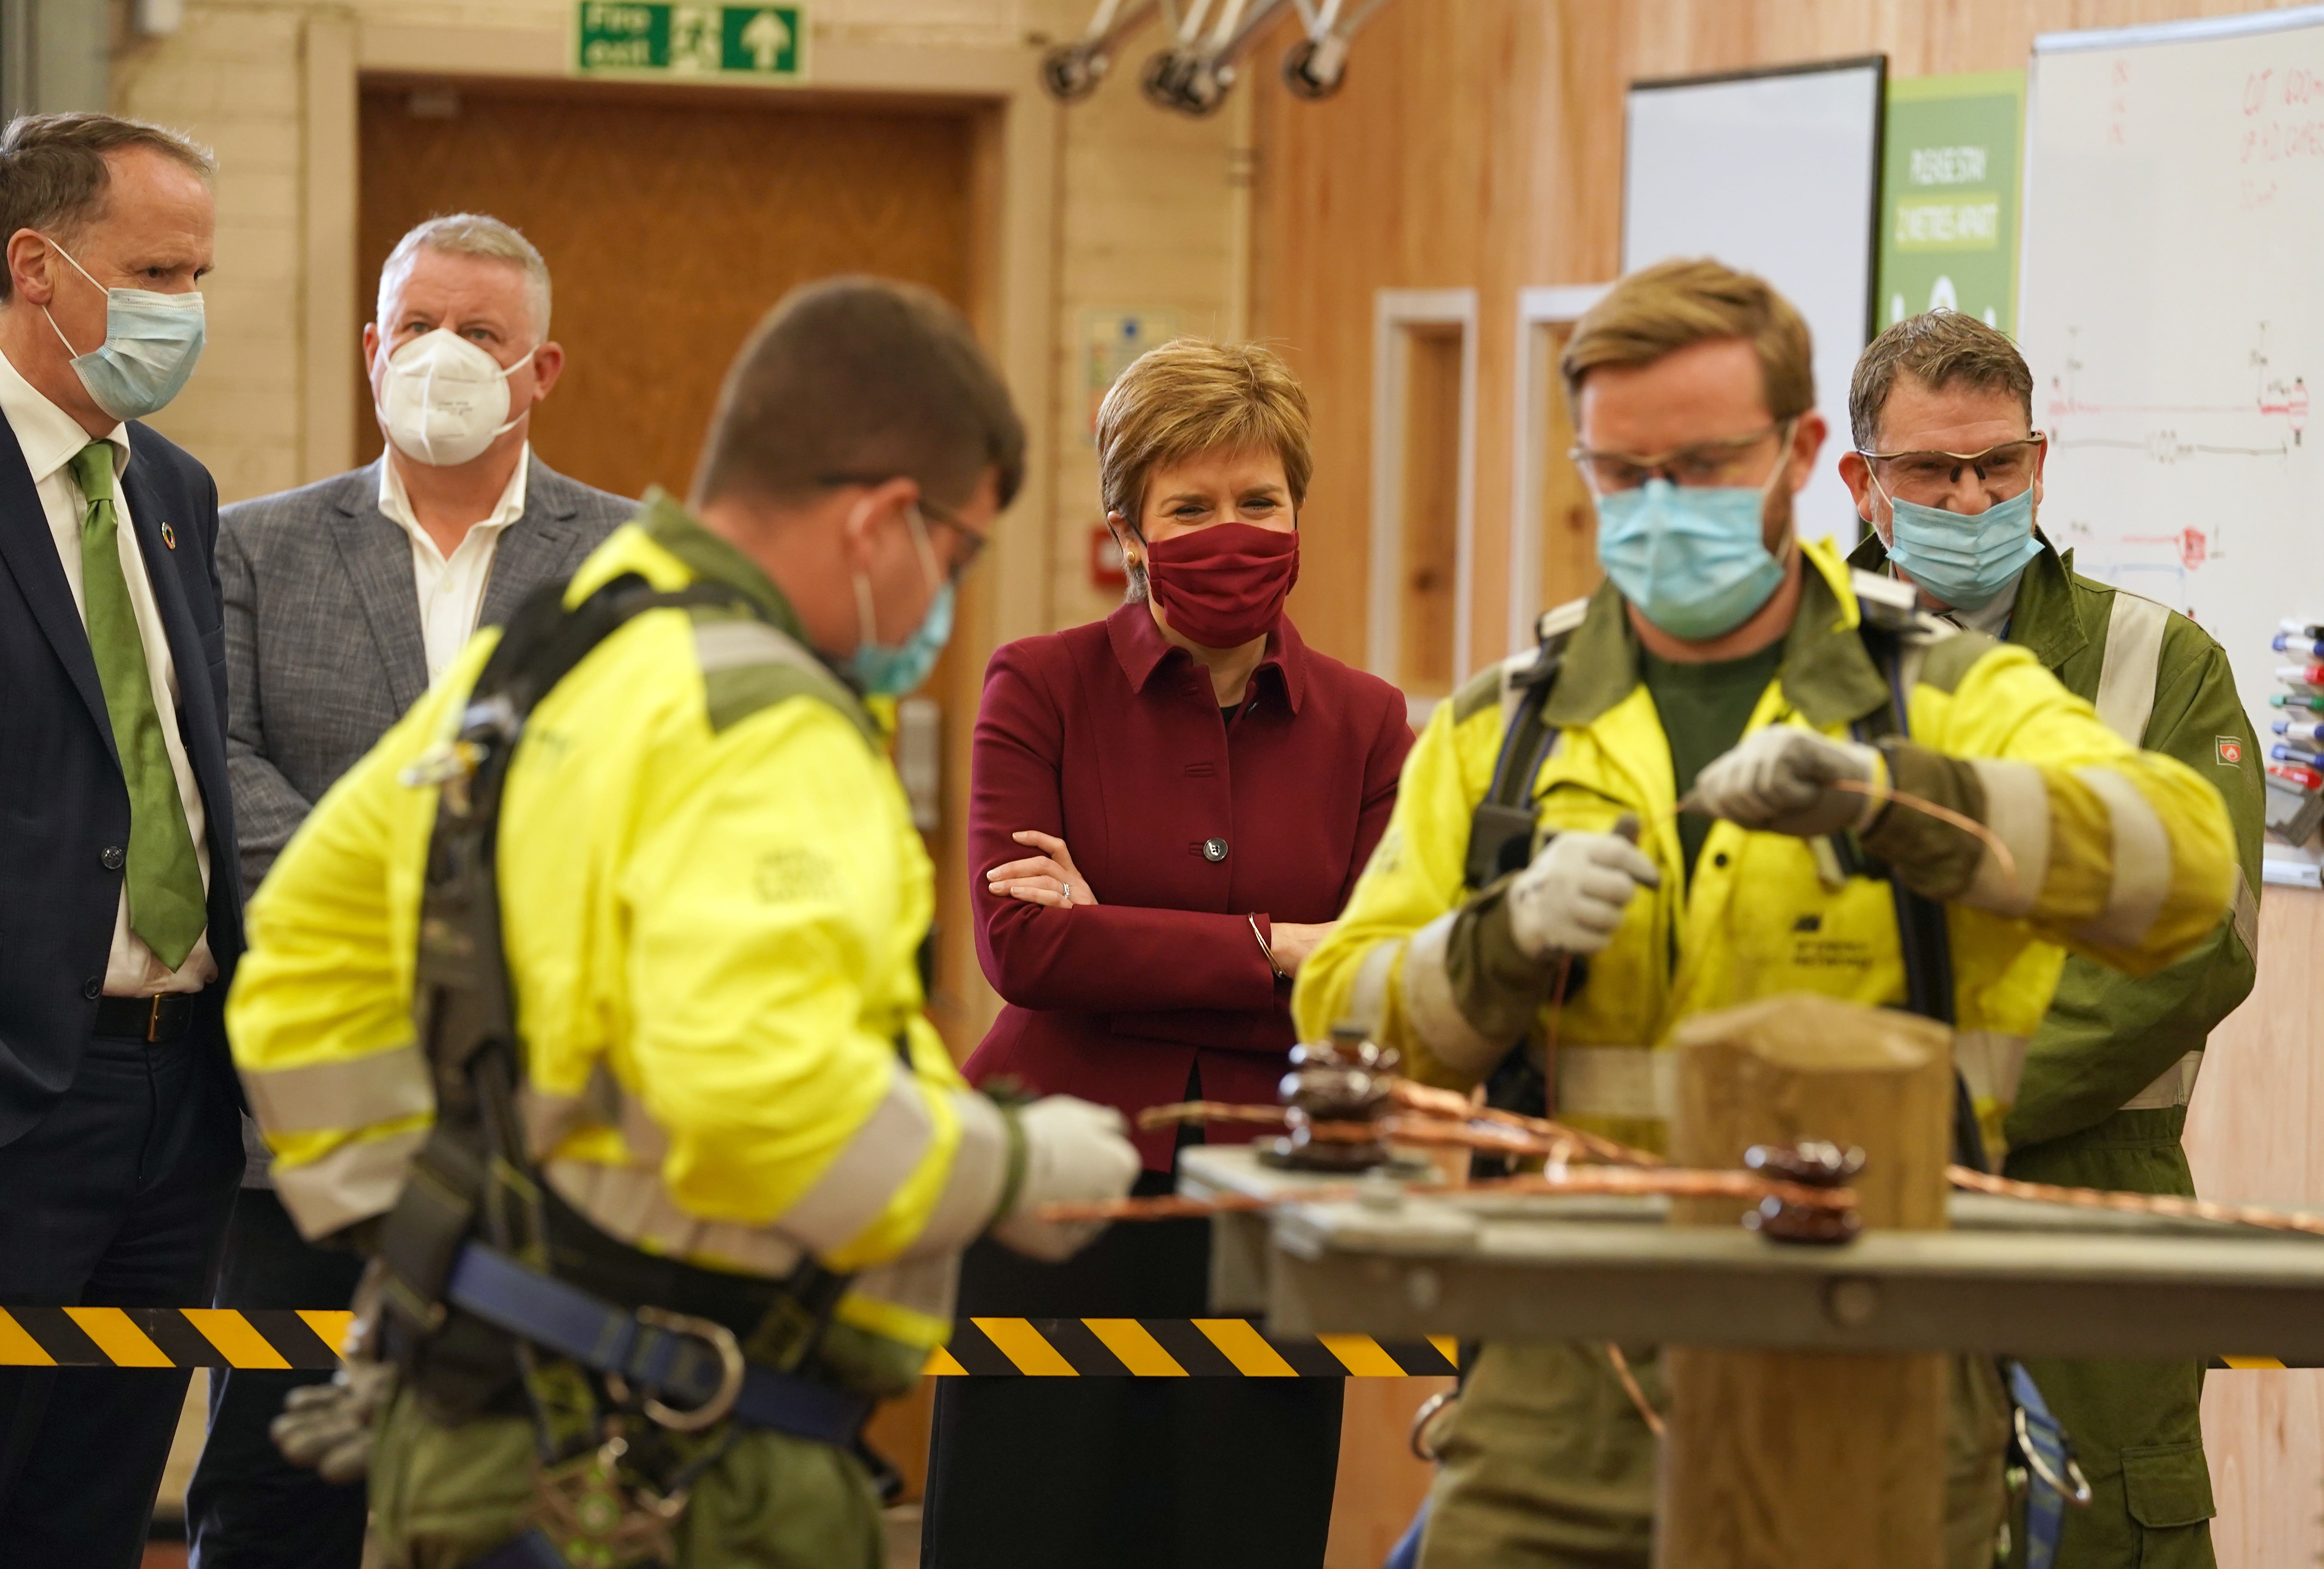 The First Minister met apprentices during her visit to Scottish Power in Cumbernauld (Andrew Milligan/PA)